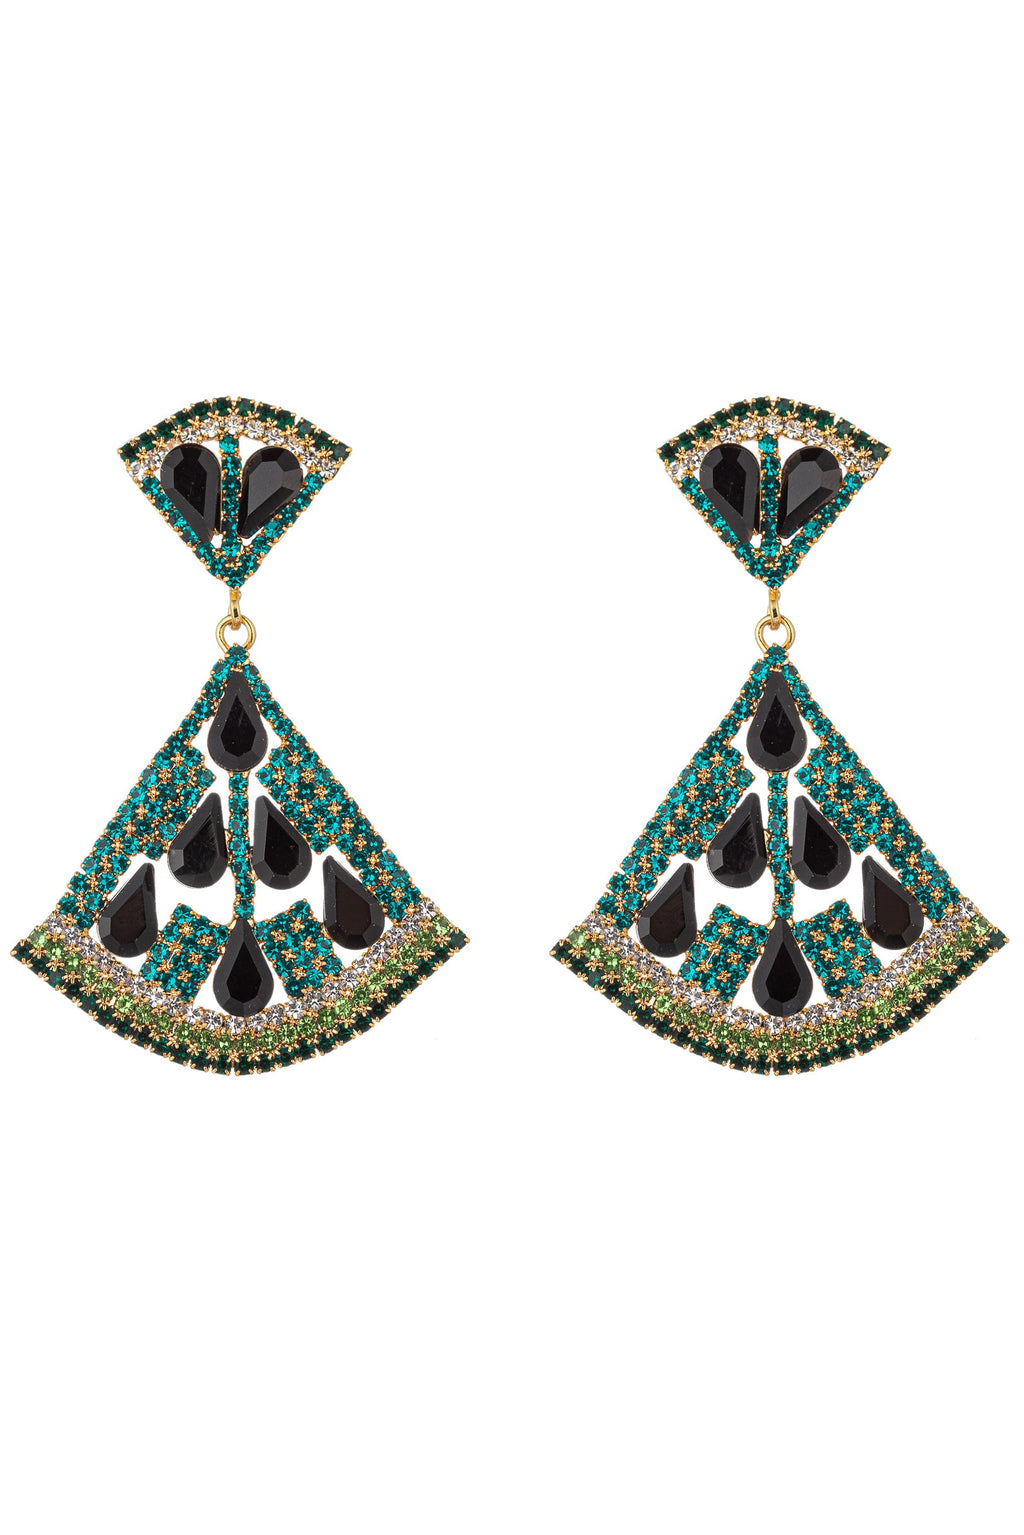 Ella's Green Cubic Zirconia Dangle Earrings: A touch of sophistication and sparkle. 